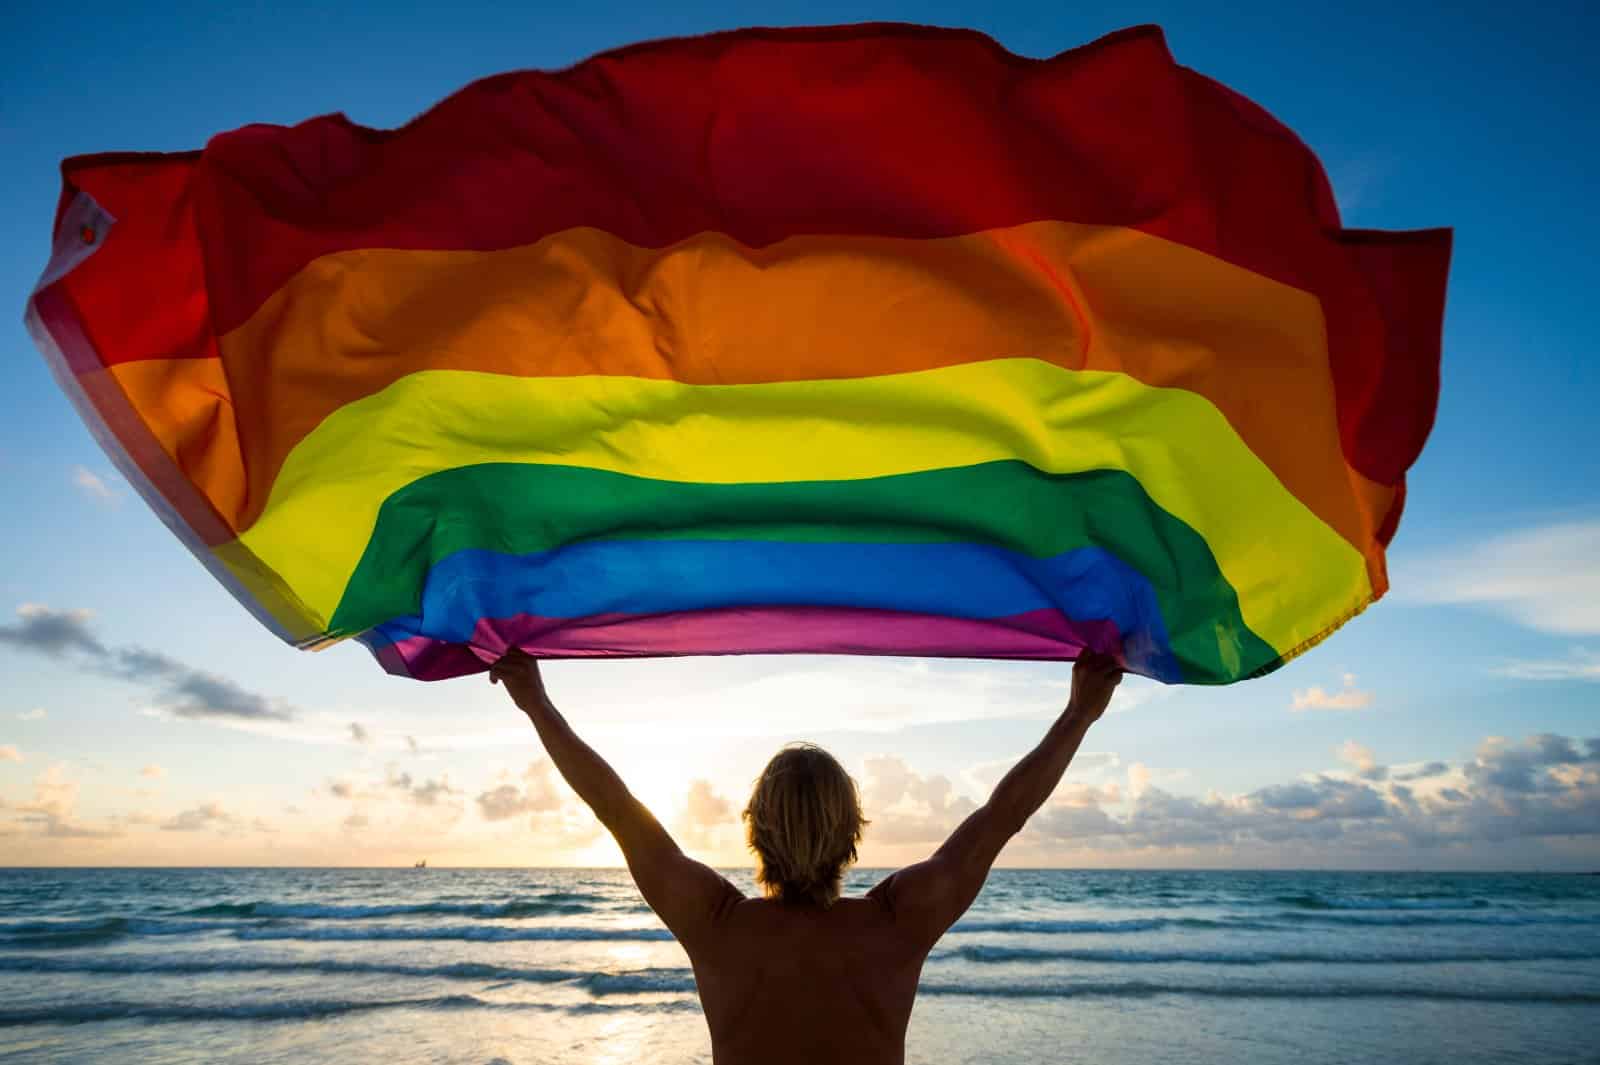 Image Credit: Shutterstock / lazyllama <p><span>Traveling as a member of the LGBTQ+ community can be a powerful experience. It’s an opportunity to connect with like-minded individuals, explore the richness of global LGBTQ+ culture, and celebrate identity in spaces designed to be welcoming and safe. The destinations highlighted in this guide are renowned for their progressive attitudes, vibrant LGBTQ+ scenes, and significant cultural contributions to the global LGBTQ+ community. From the historic streets of San Francisco to the sun-drenched beaches of Mykonos, each destination offers a unique blend of attractions, events, and community spaces that cater specifically to LGBTQ+ travelers.</span></p>